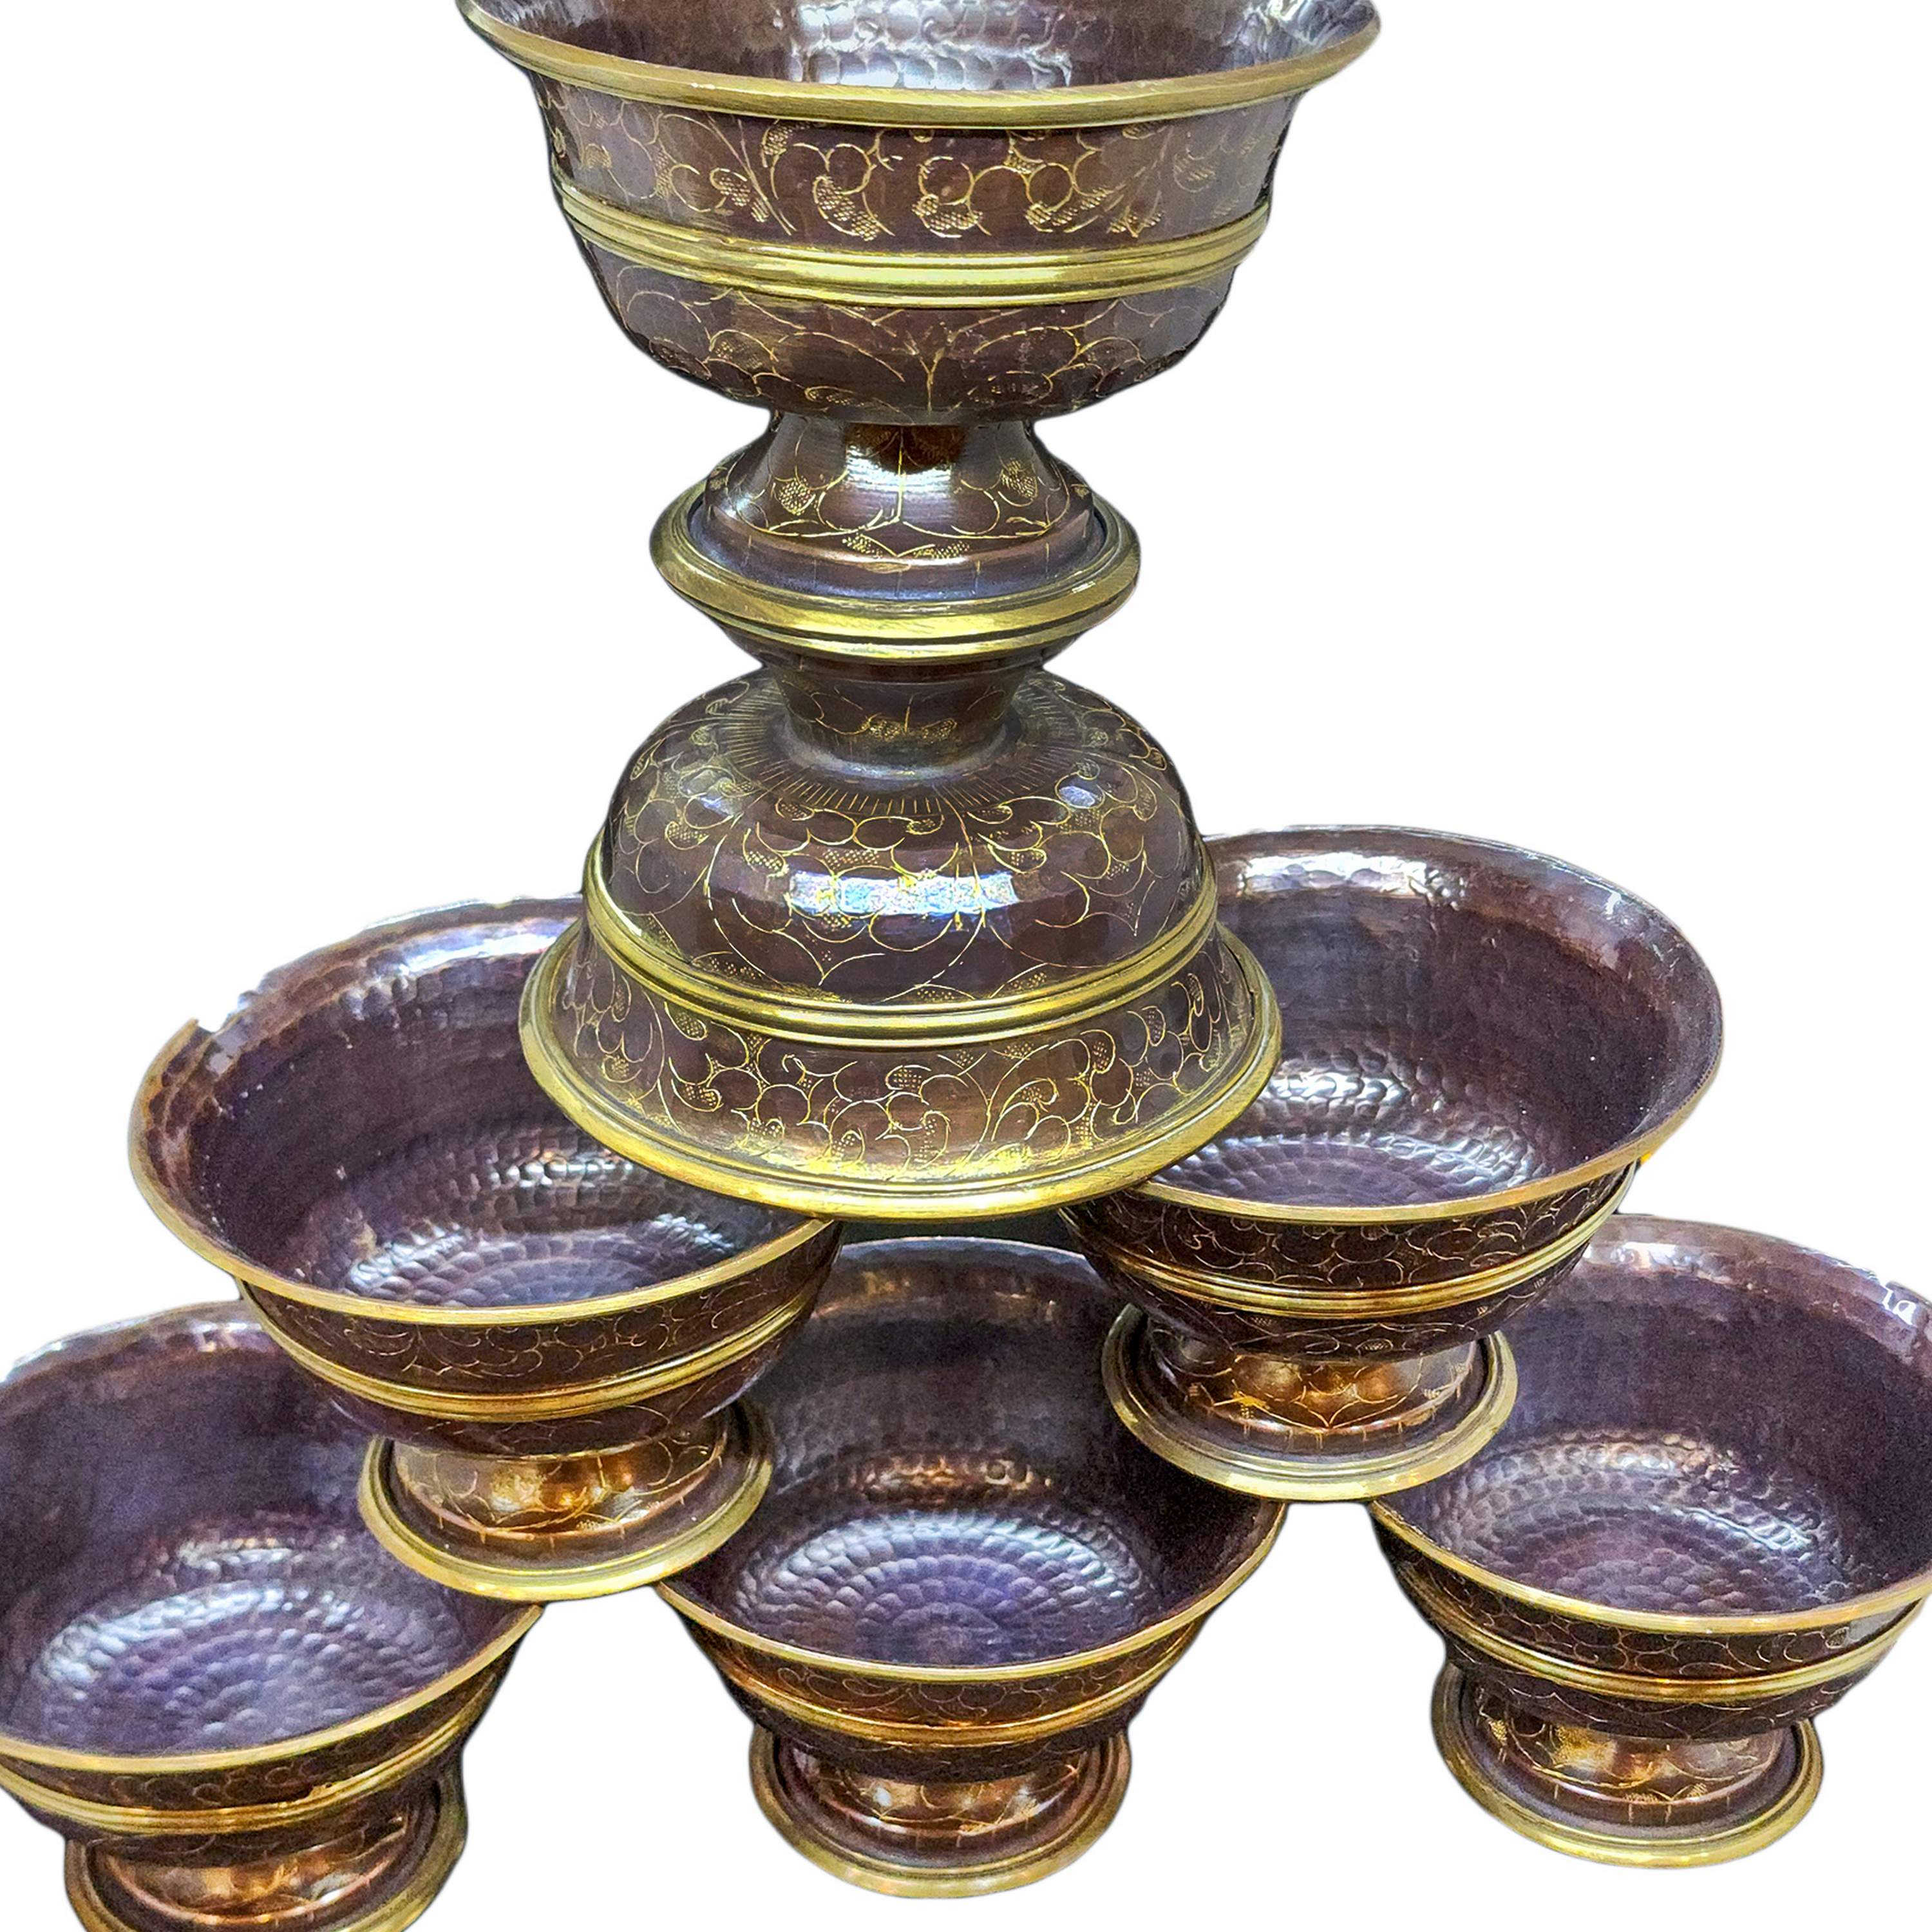 Copper Offering Bowl With Stand And Hand Carving 7 Pcs Set